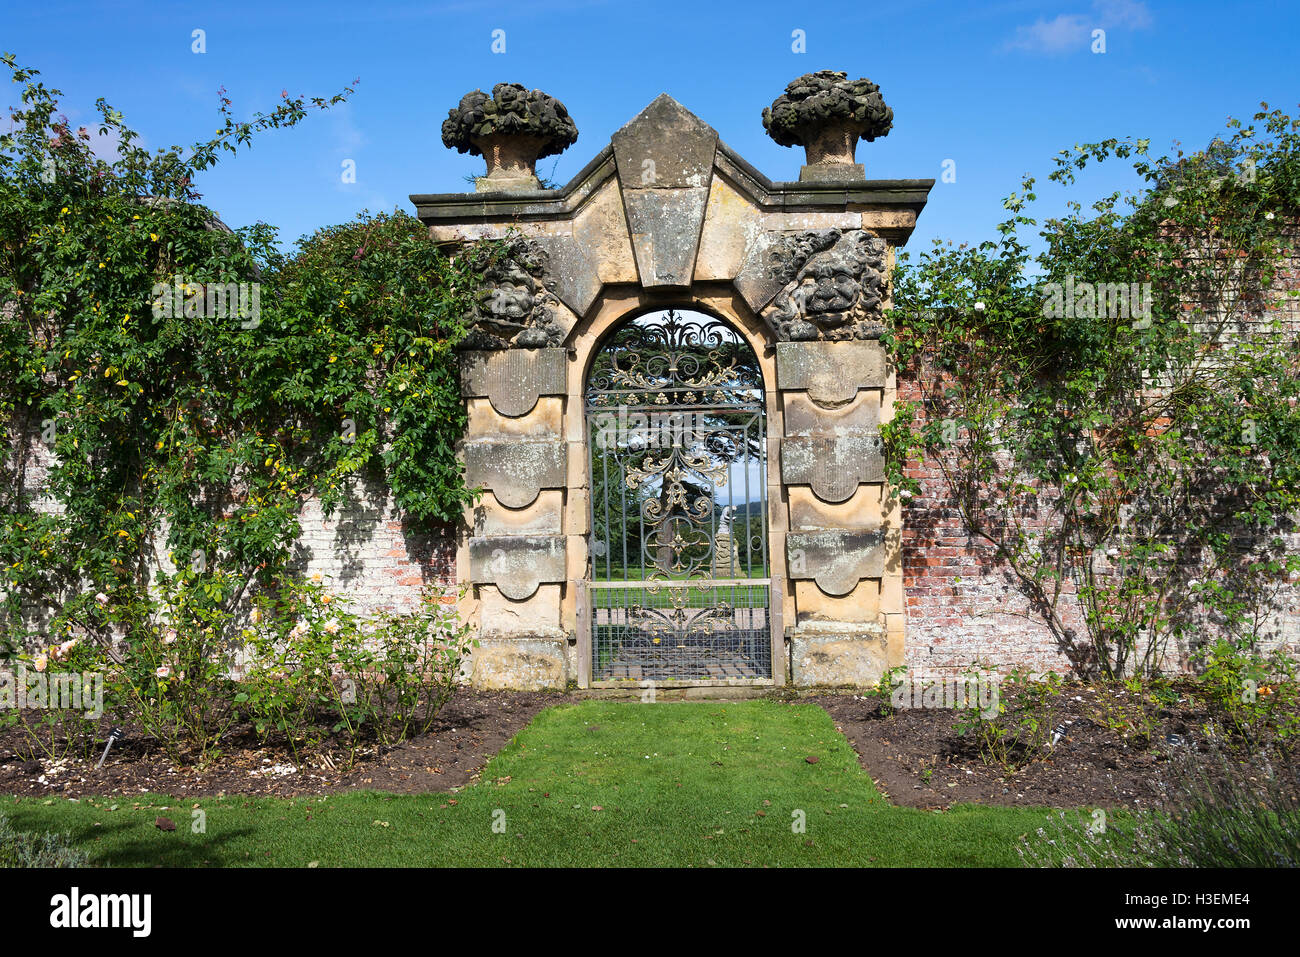 Intricate Stone Gateway with Wrought Iron Gate in the Walled Garden at Castle Howard near York North Yorkshire England United Kingdom UK Stock Photo